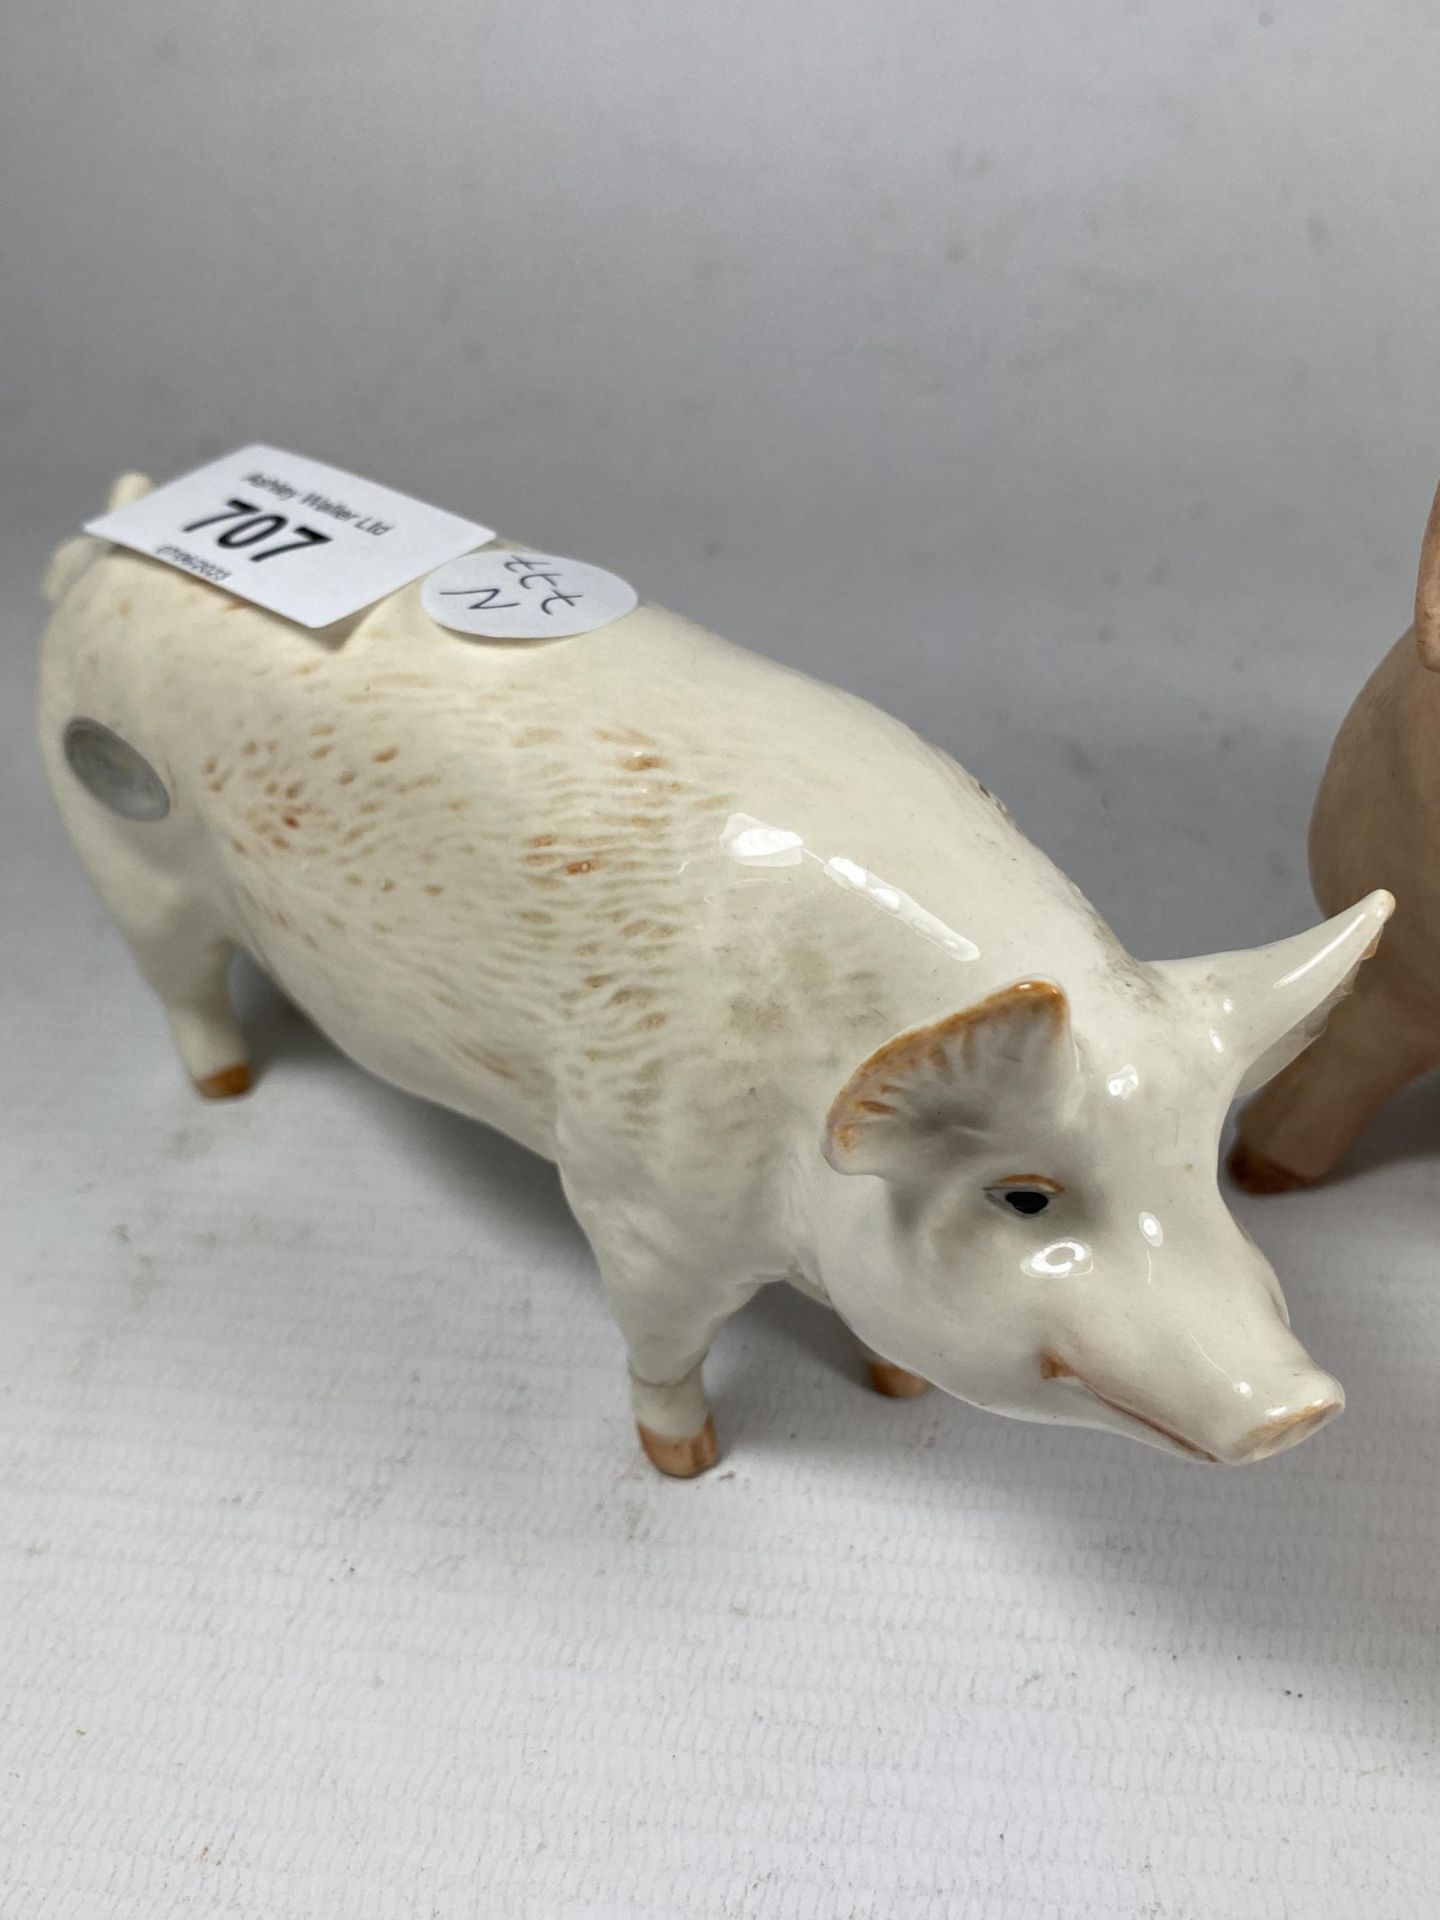 TWO CERAMIC PIGS - A BESWICK CH WALL CHAMPION BOY 53 AND AN AYNSLEY 'PIGGY' (CHIP TO EAR) - Image 3 of 4